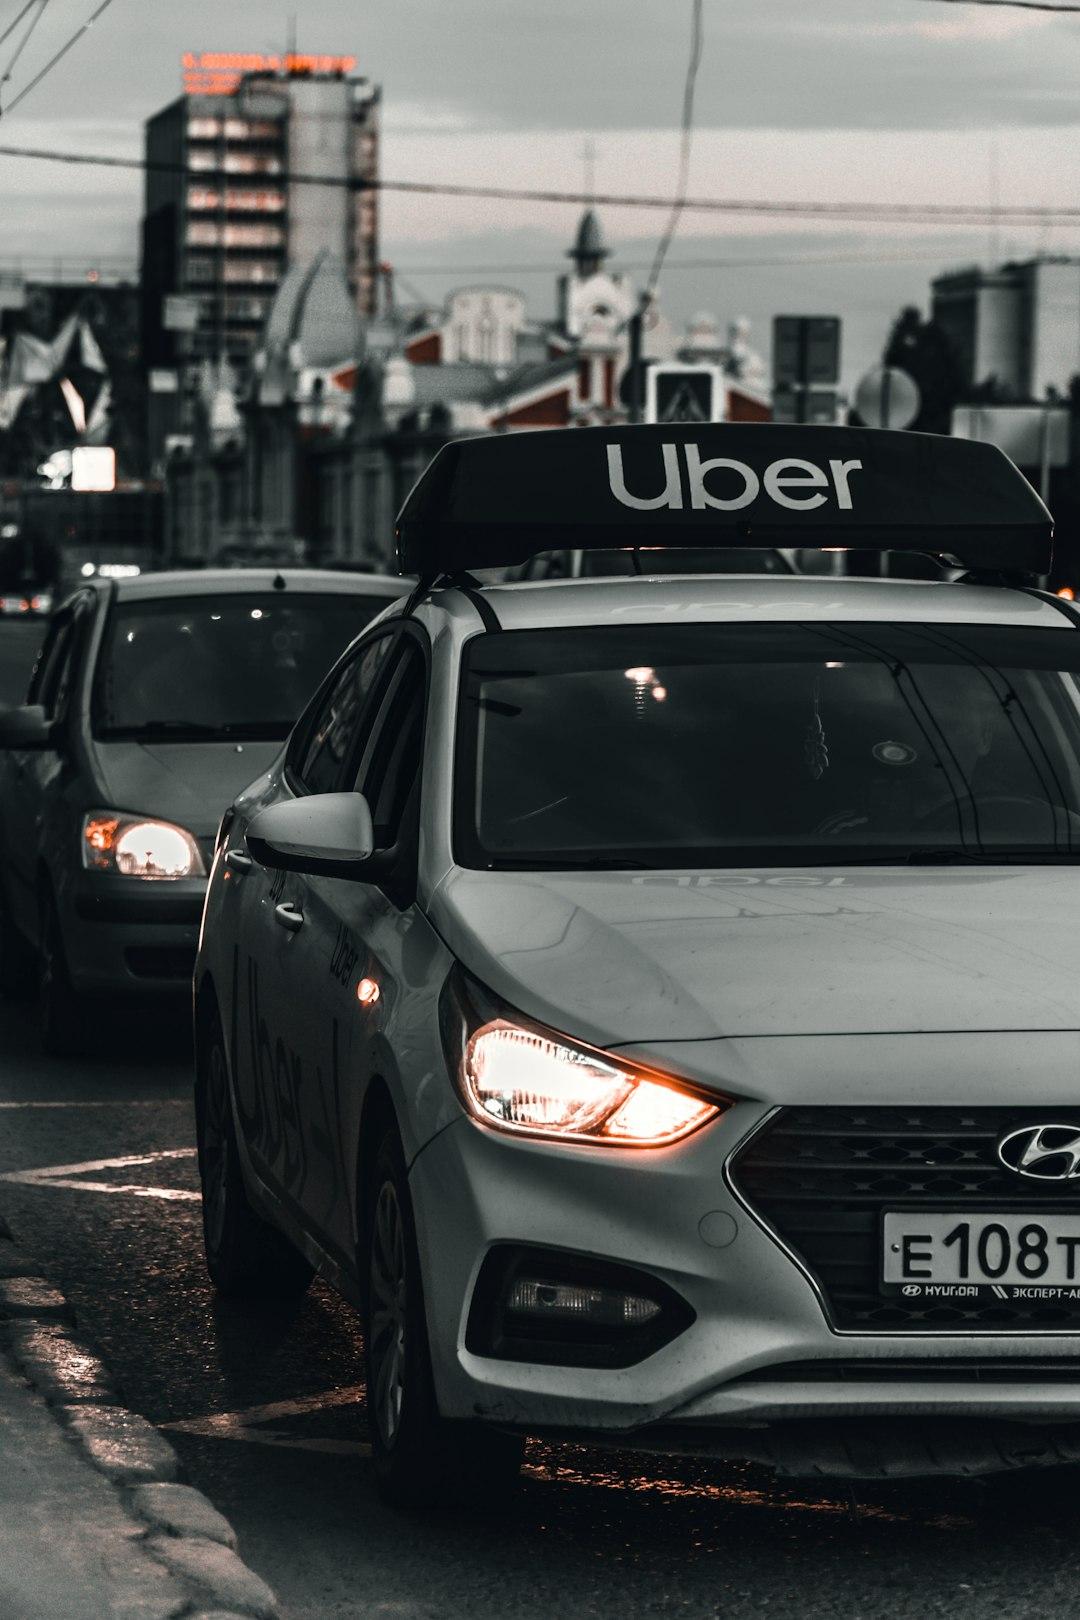 Lessons from Uber's Referral Experiences